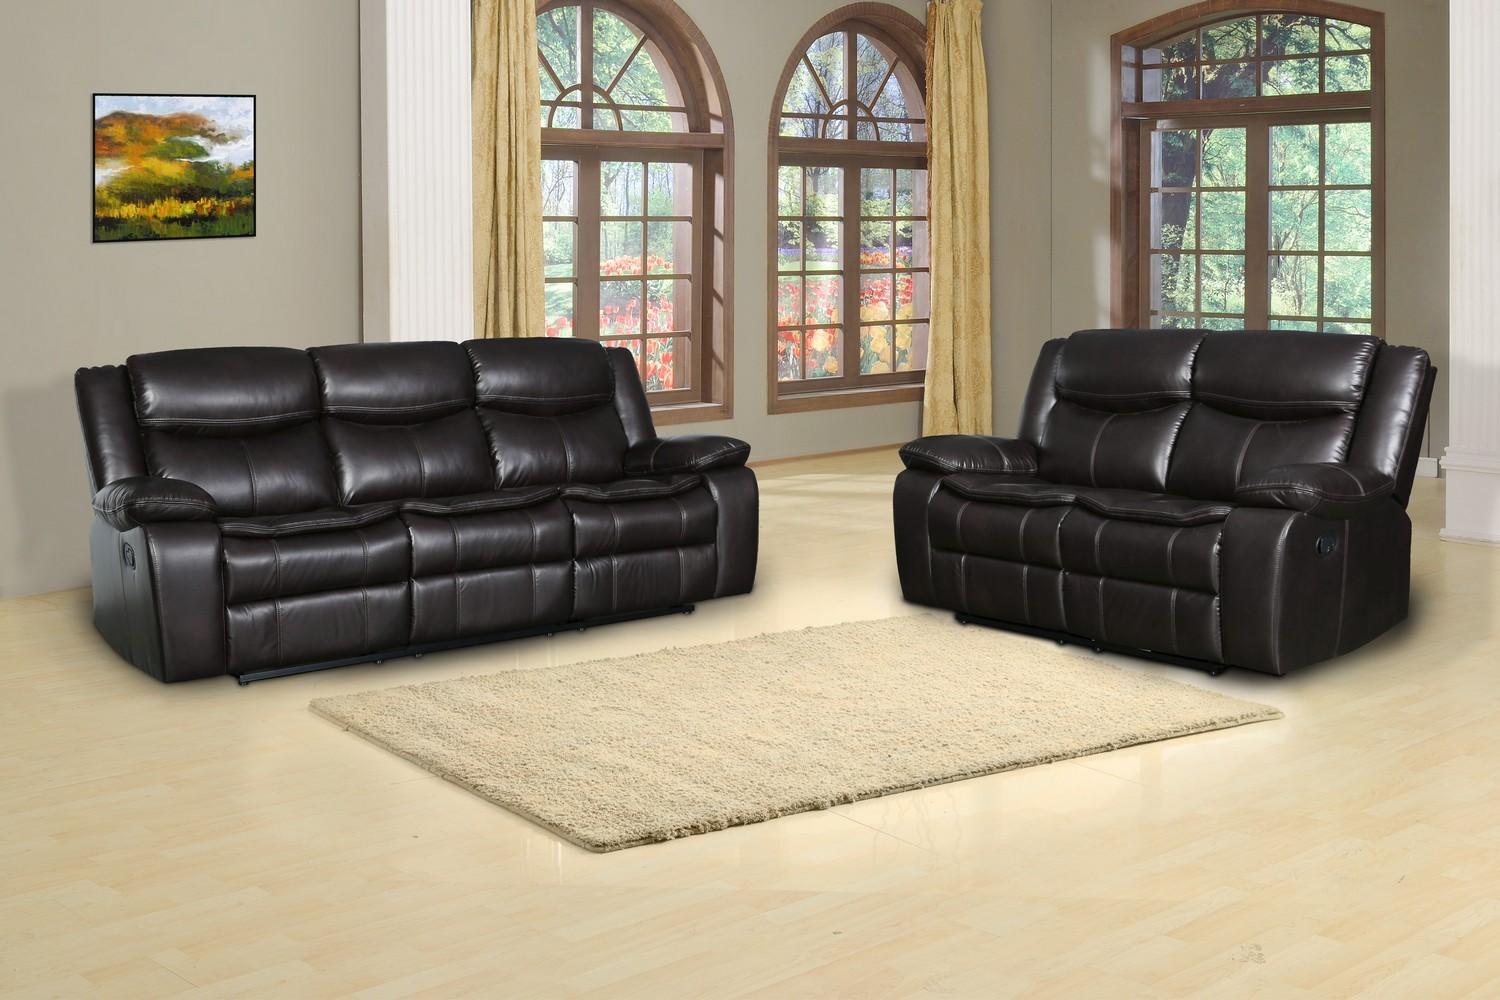 Contemporary Reclining Living Room Set 6967 Reclining Living Room Set 2PCS 6967-BROWN-S-2PCS 6967-BROWN-S-2PCS in Brown leather Air